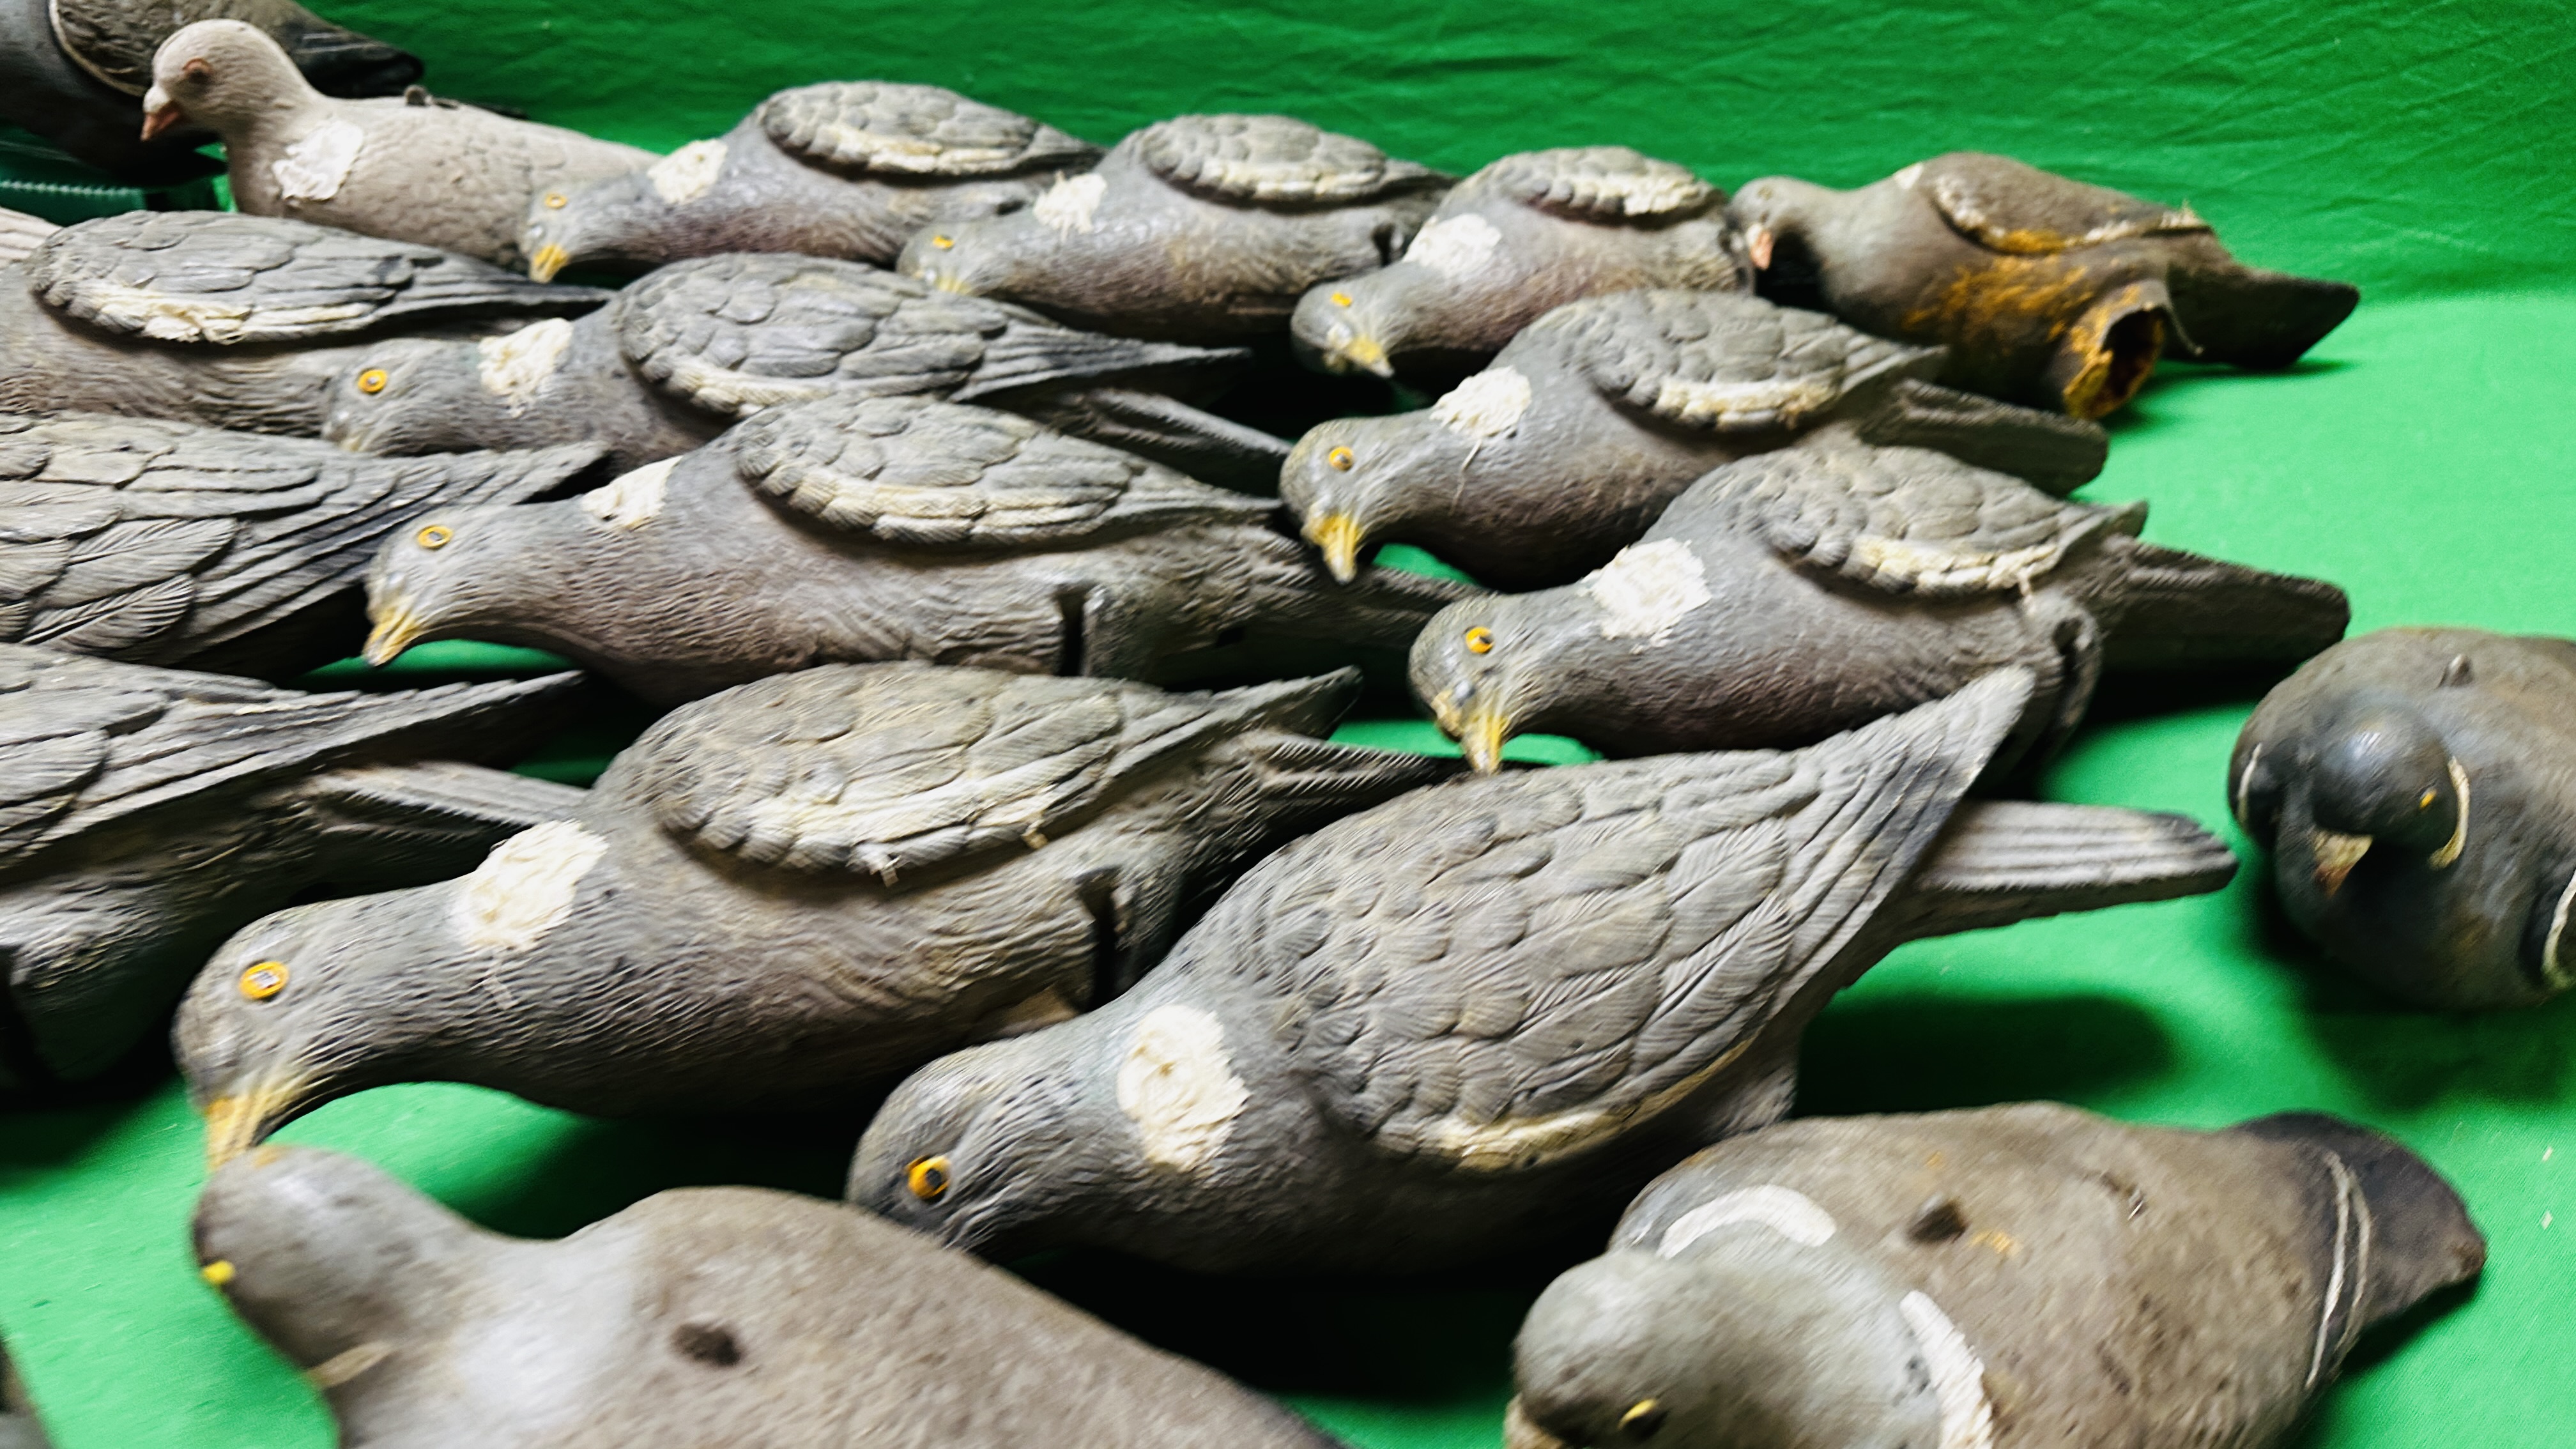 A GROUP OF 26 PIGEON DECOYS. - Image 10 of 10